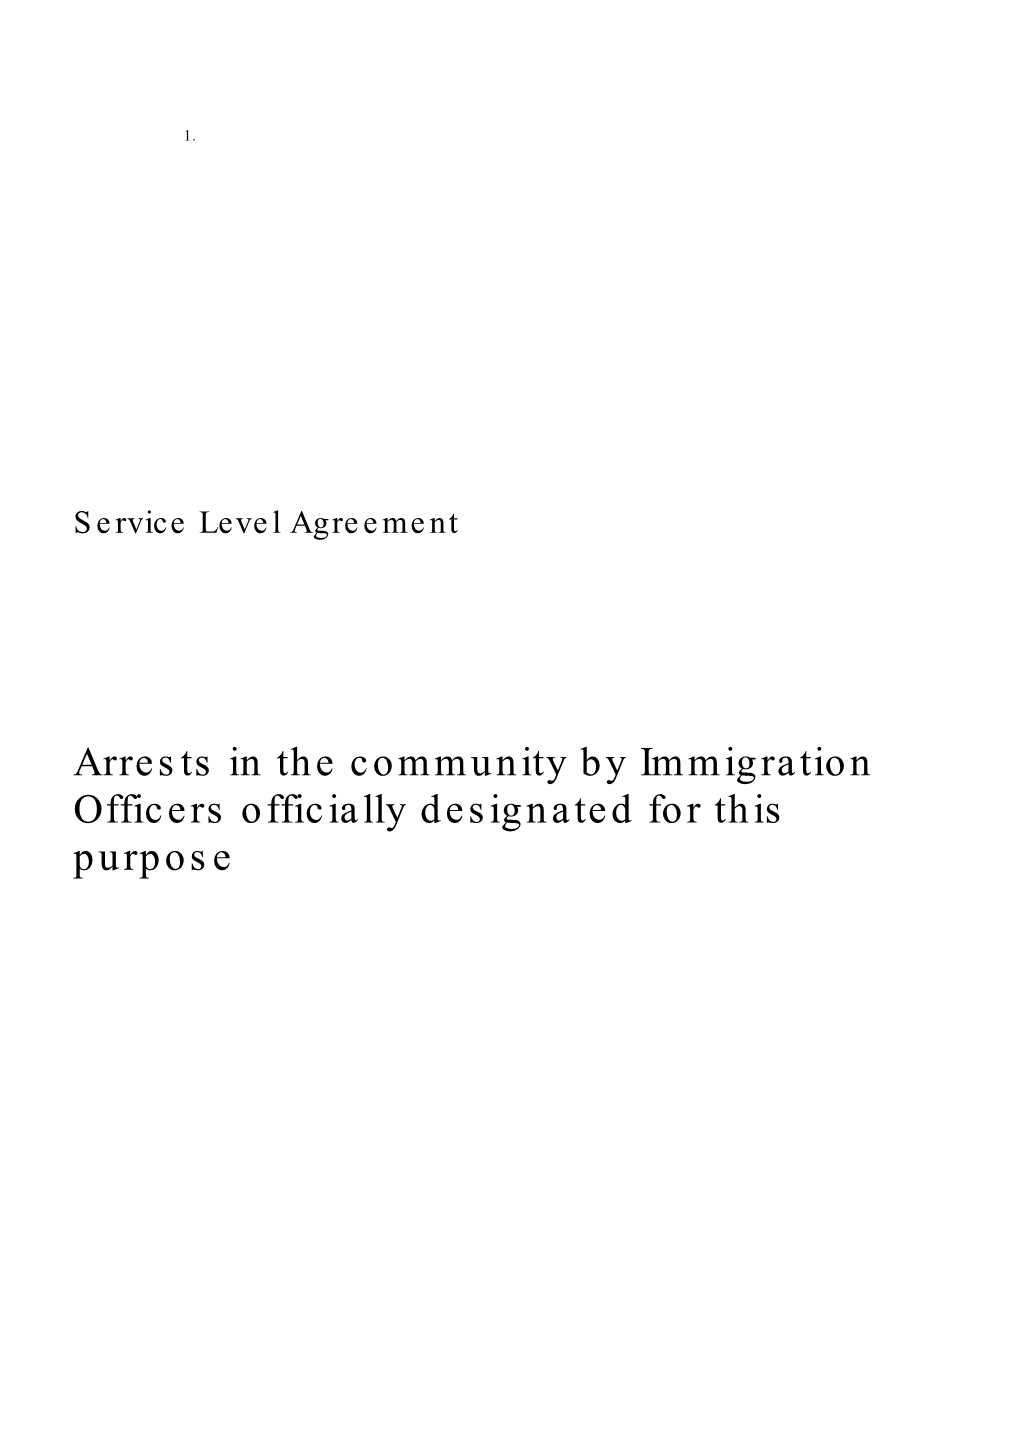 Arrests in the Community by Immigration Officers Officially Designated for This Purpose Table of Contents